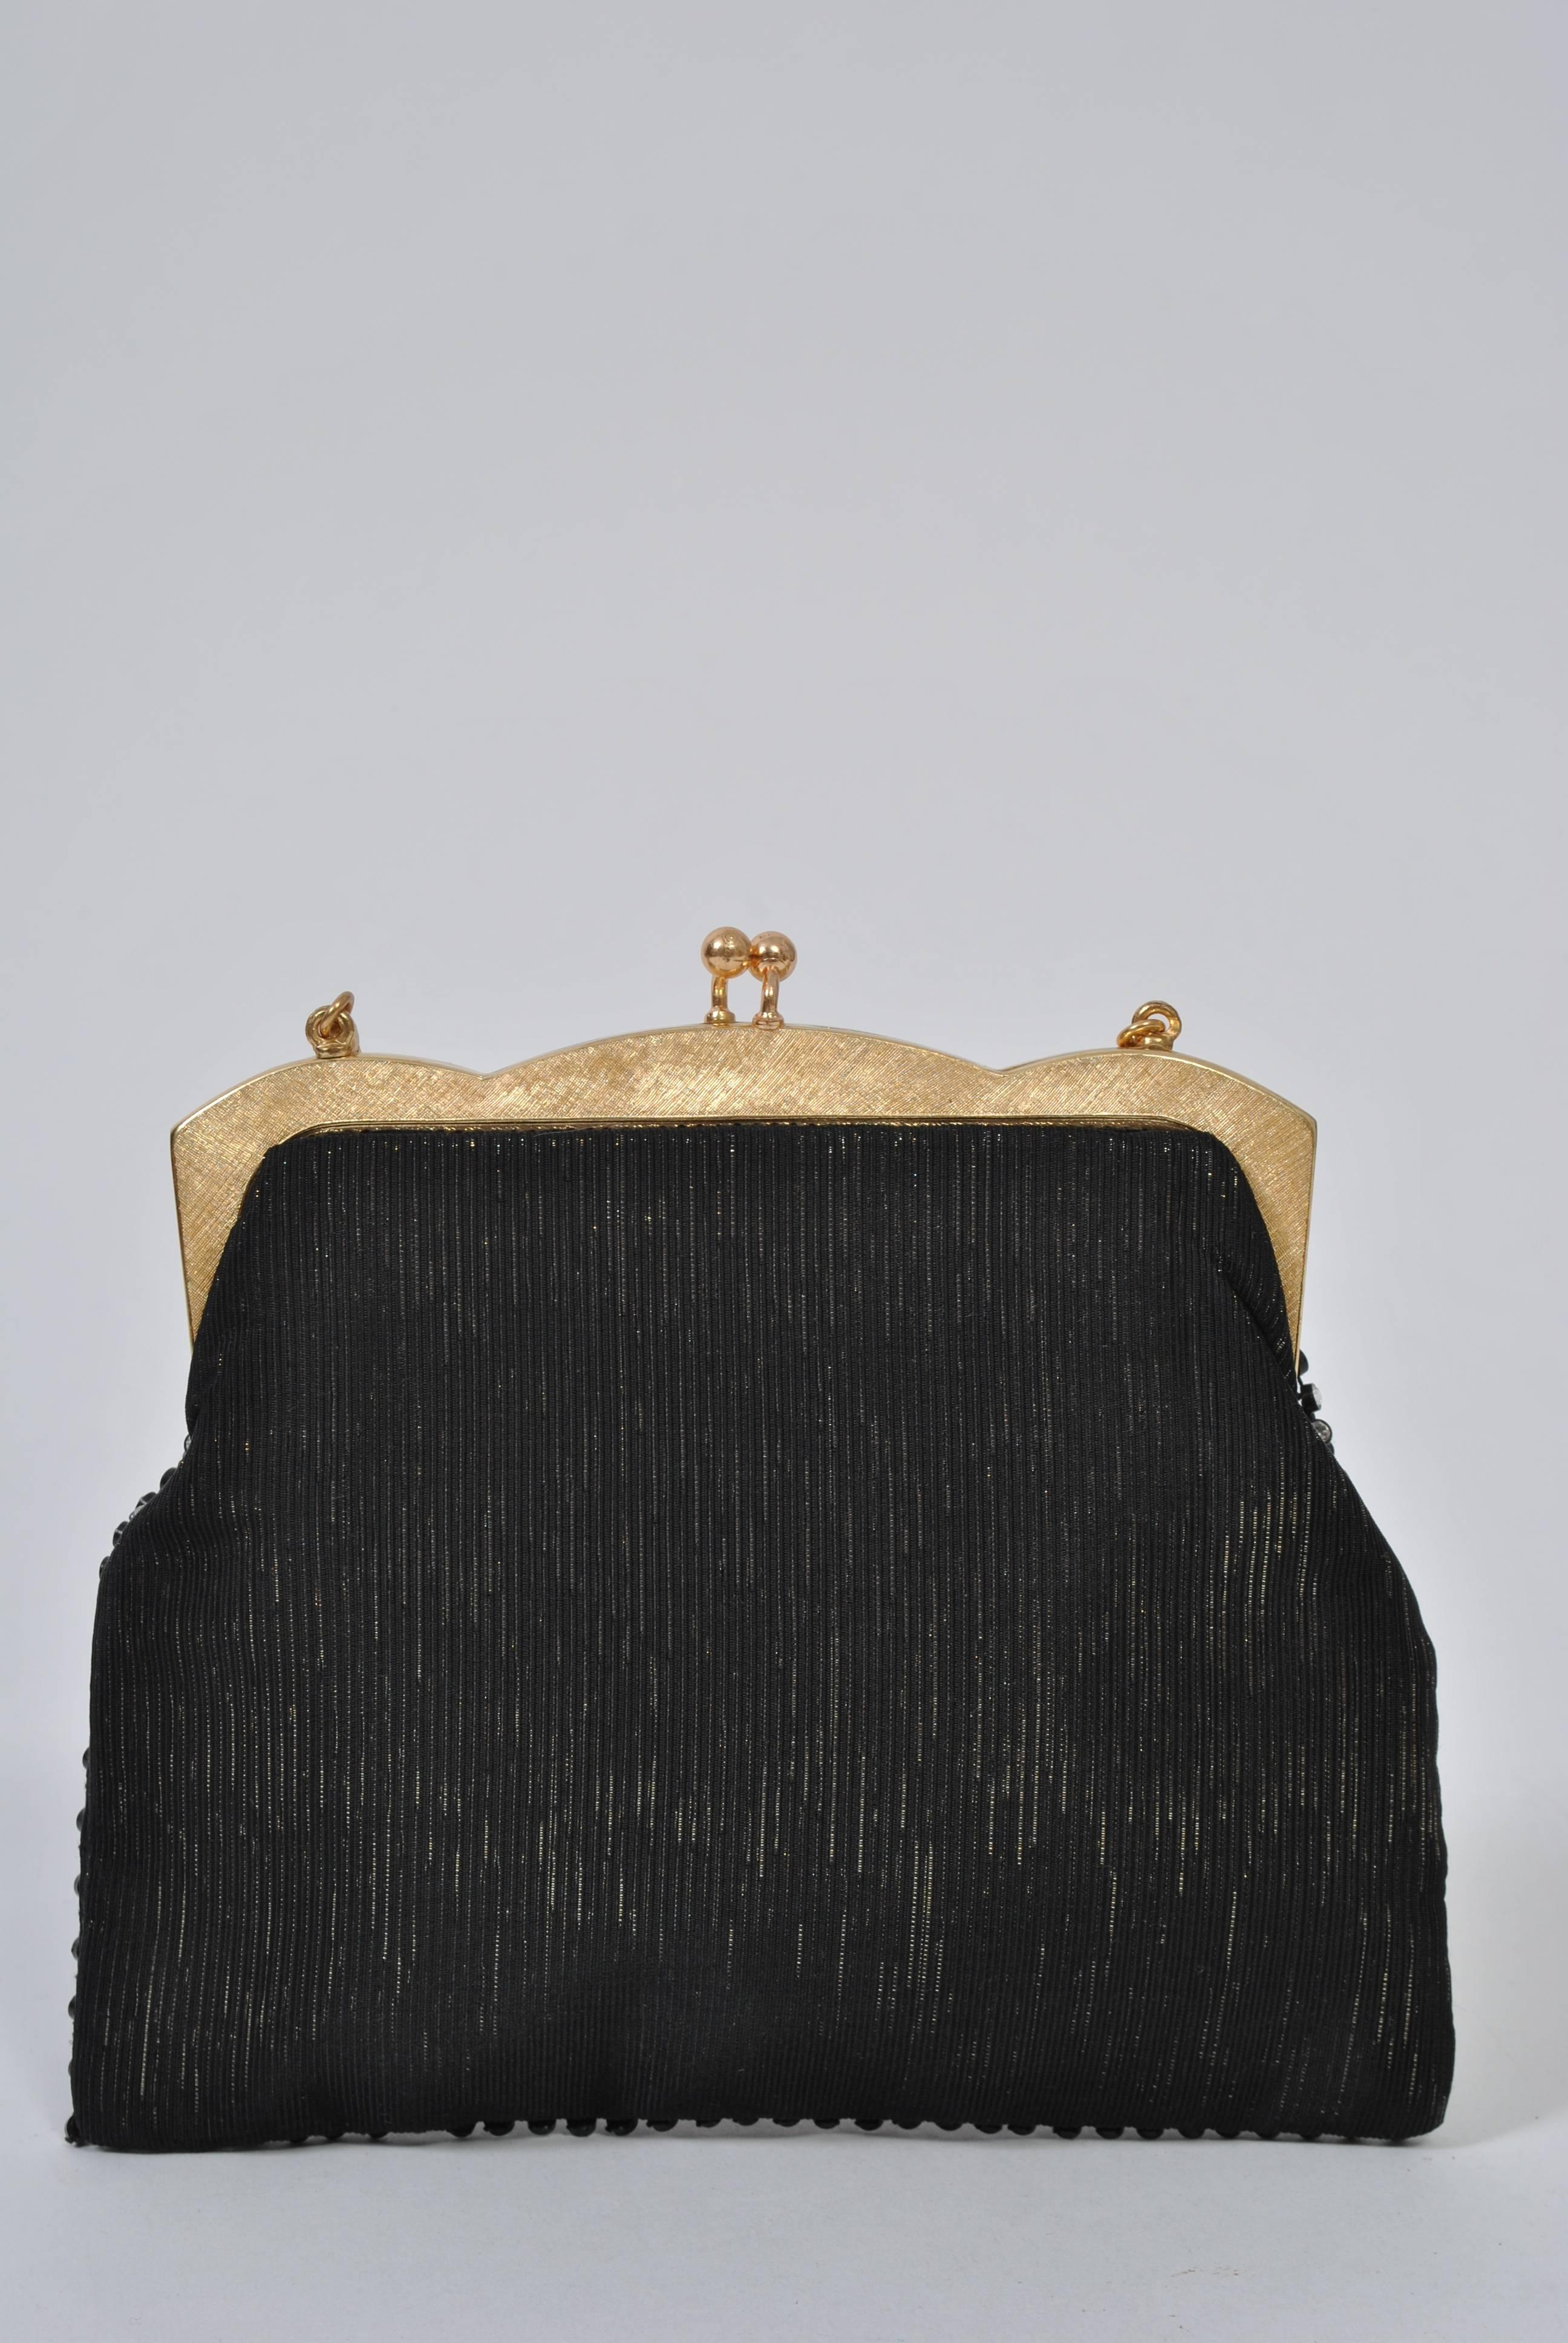 Black evening bag with rhinestones on front, gold frame and chain. Background fabric is gold metallic striated stripe. Black satin interior with side pocket.